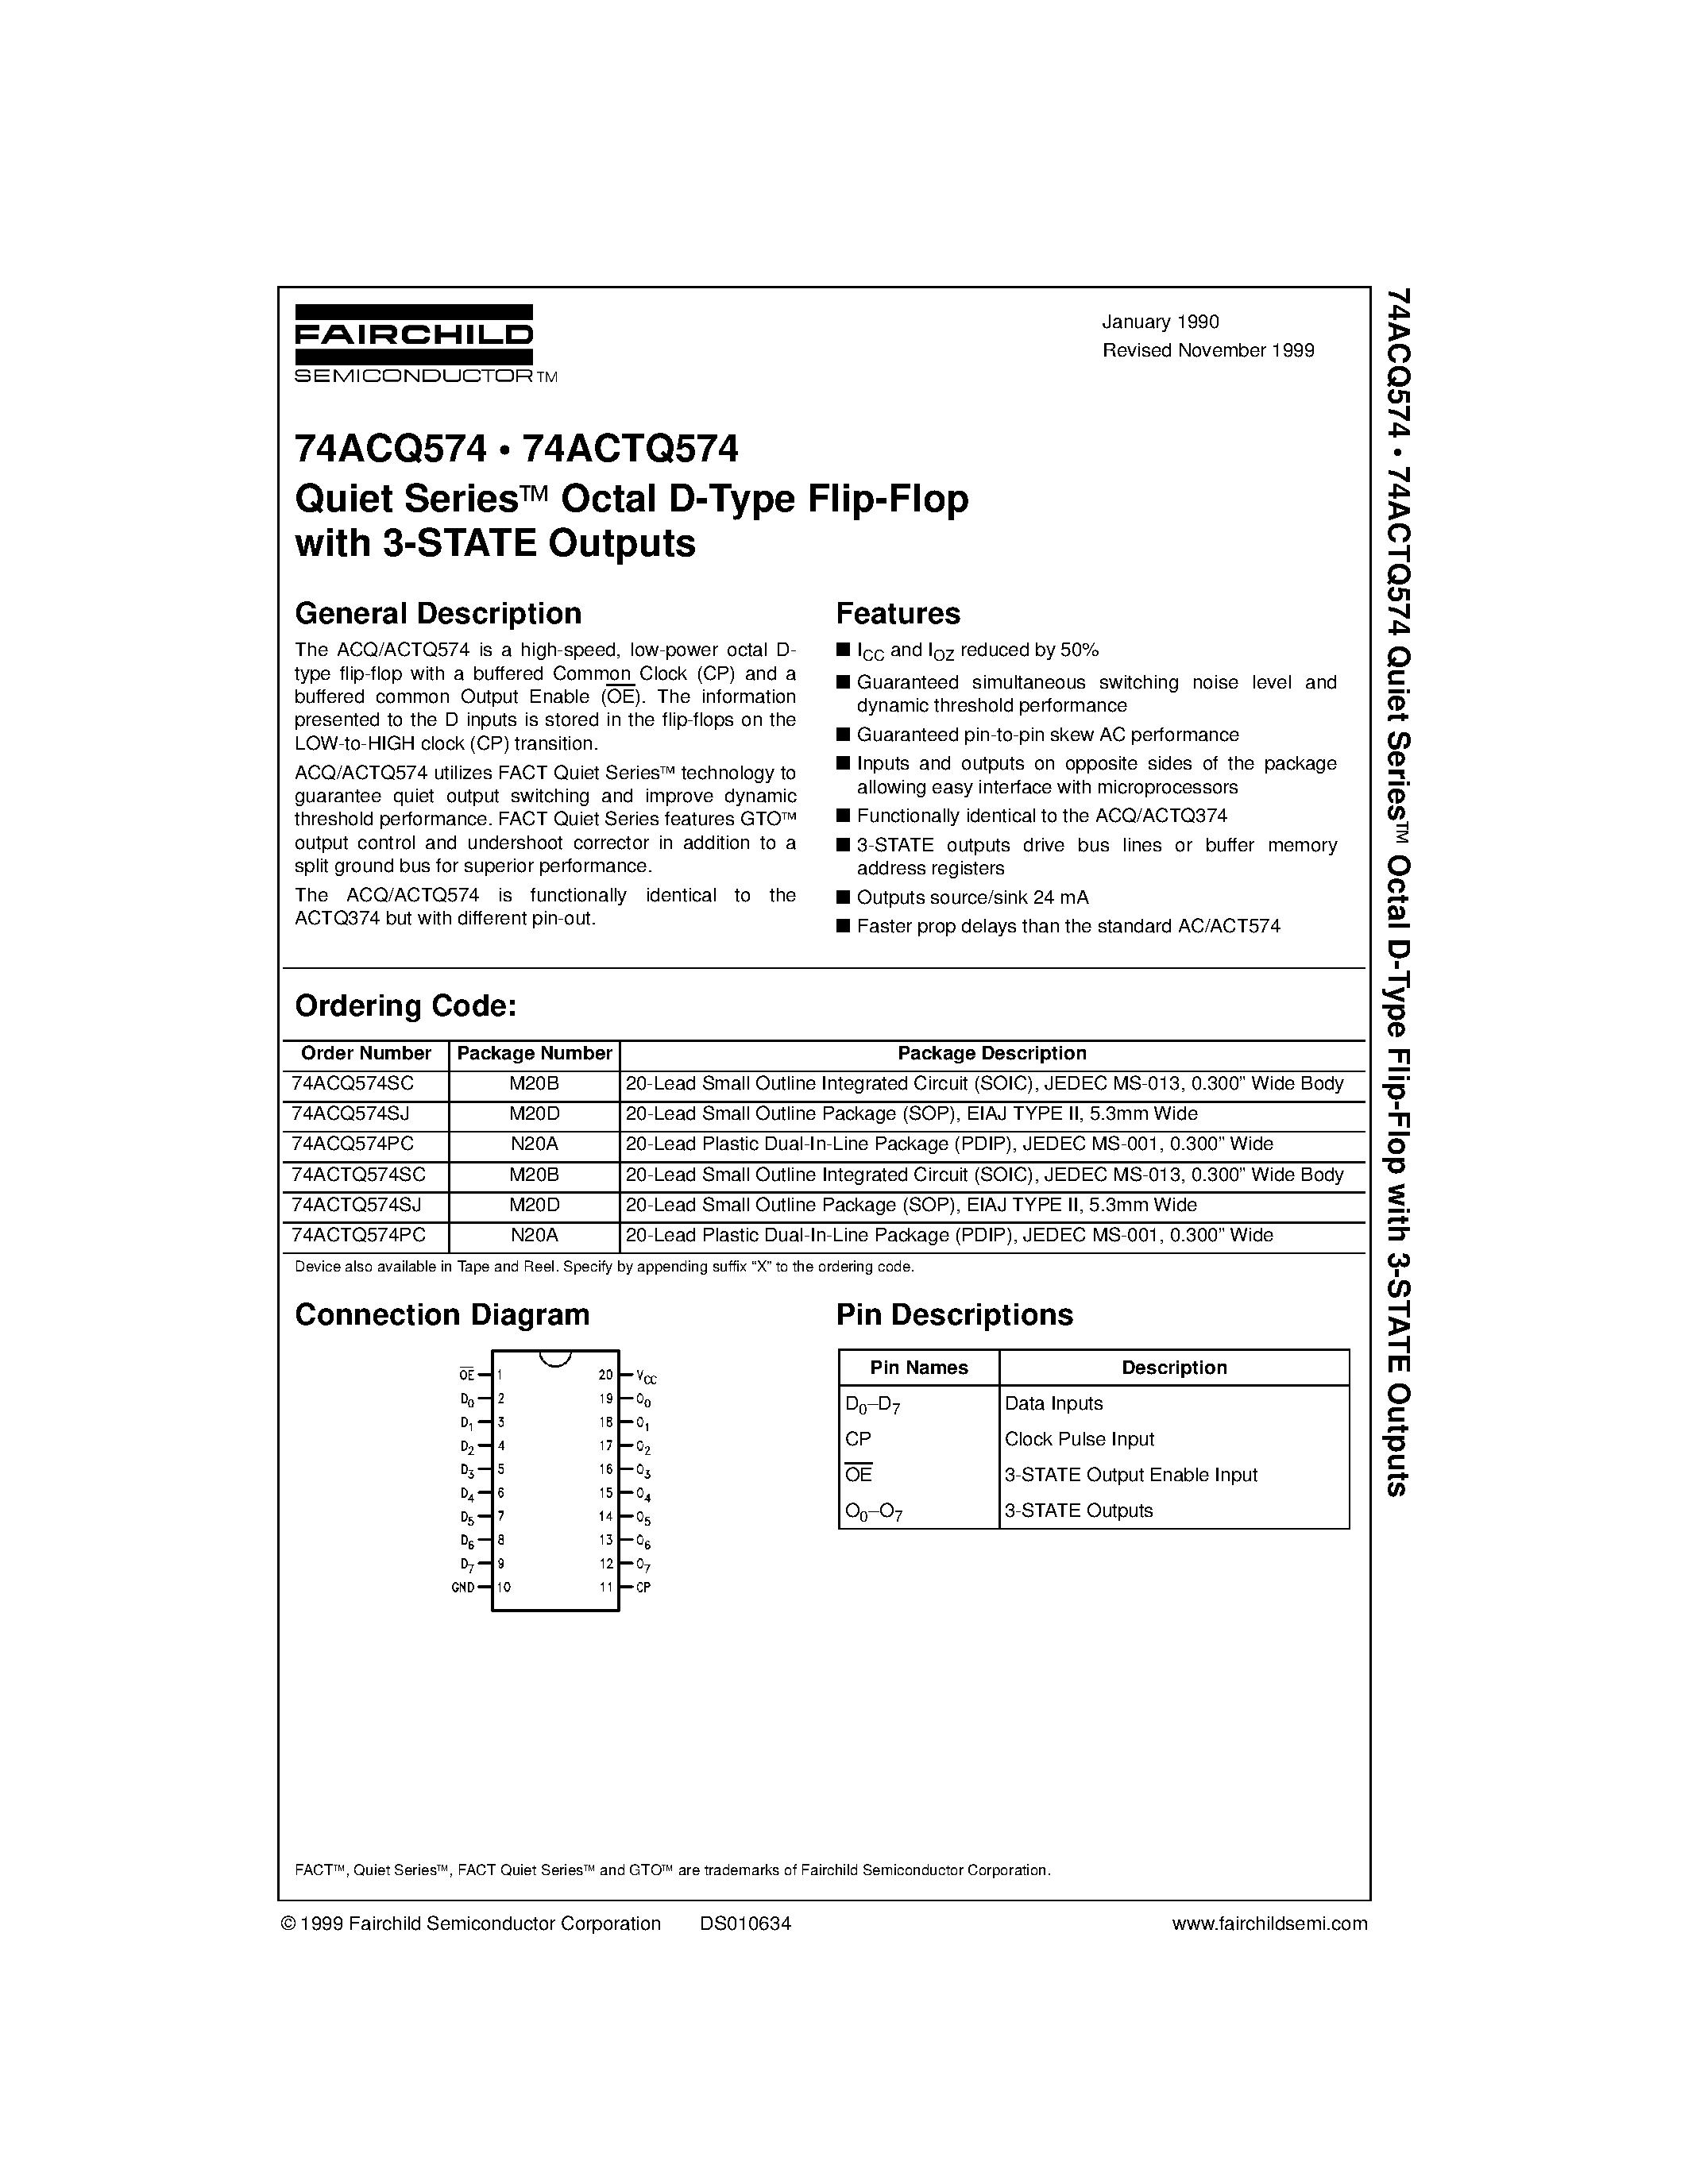 Datasheet 74ACQ574SC - Quiet Series Octal D-Type Flip-Flop with 3-STATE Outputs page 1